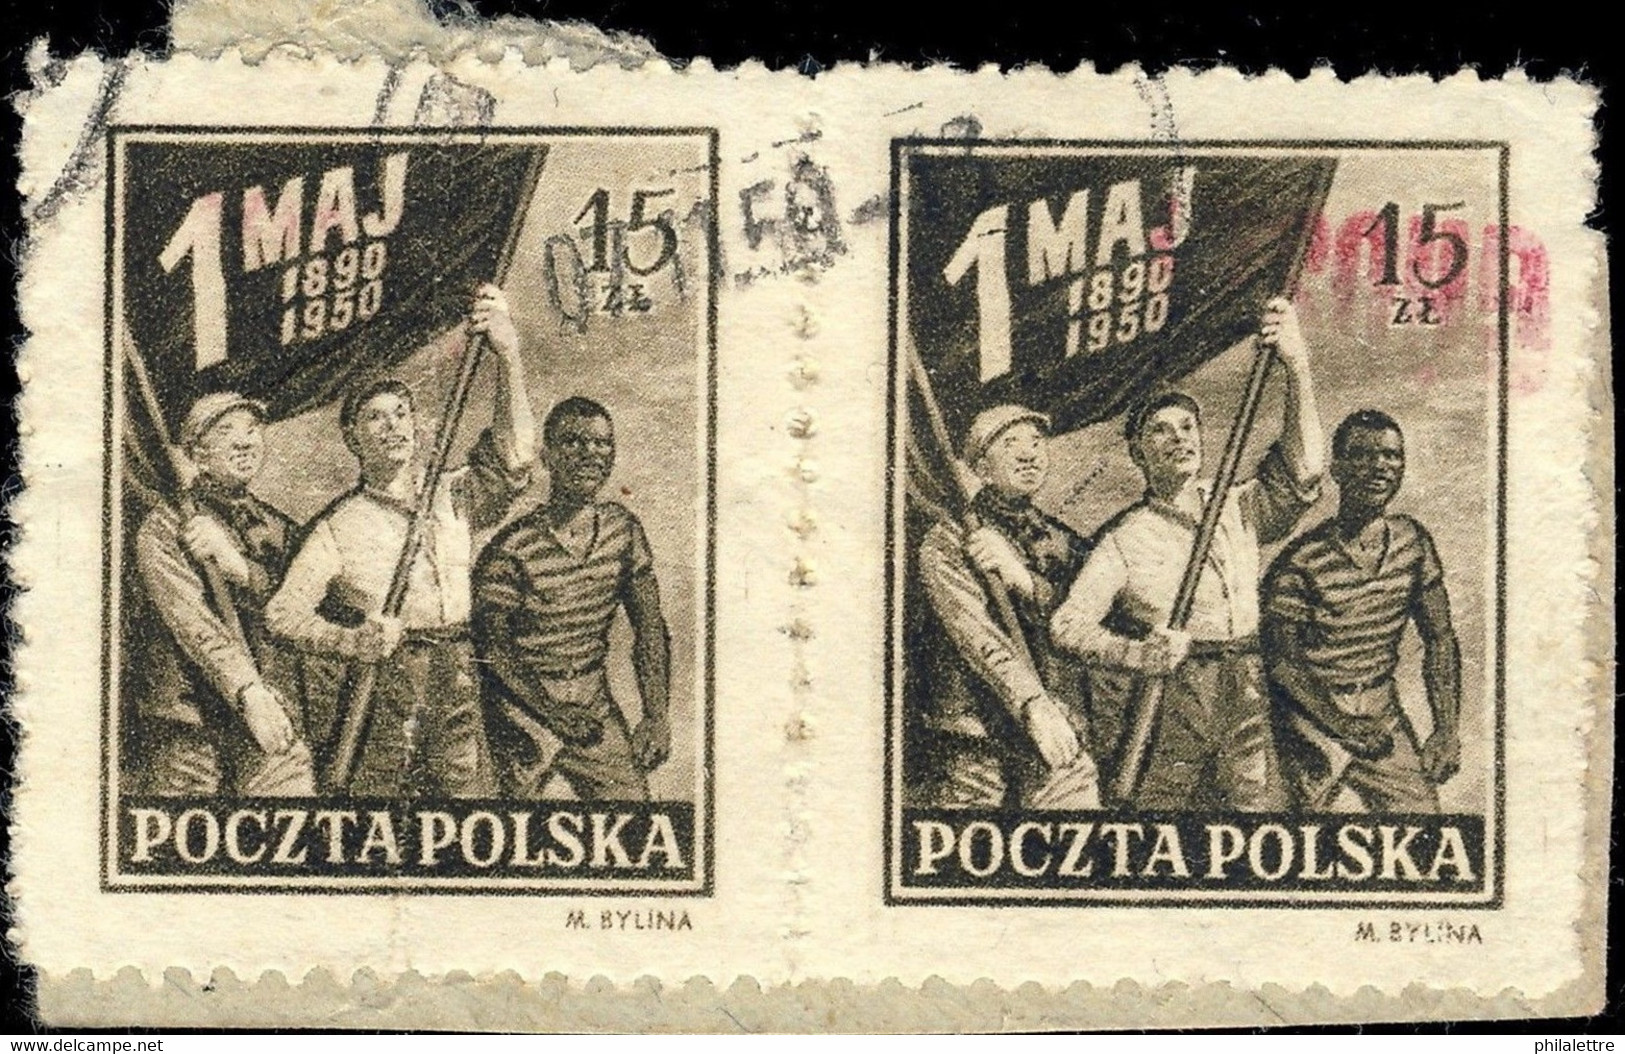 POLOGNE / POLAND 1950 GROSZY O/P T.3 Katowice/Krakow Kt./Kr.1c Red INVERTED Mi.662 - Used Stamps